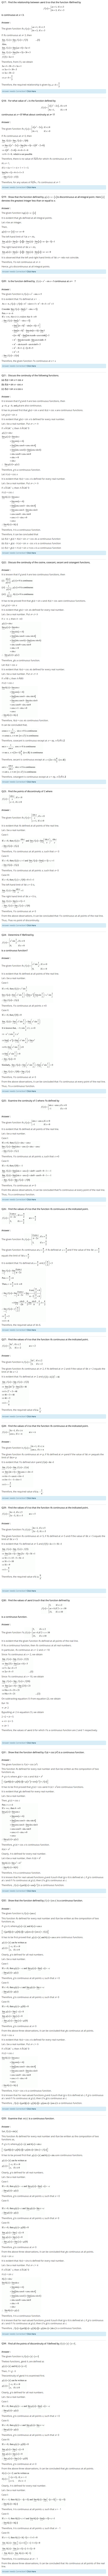 NCERT Solutions for Class 12 Maths Chapter 5 Continuity and Differentiability 2